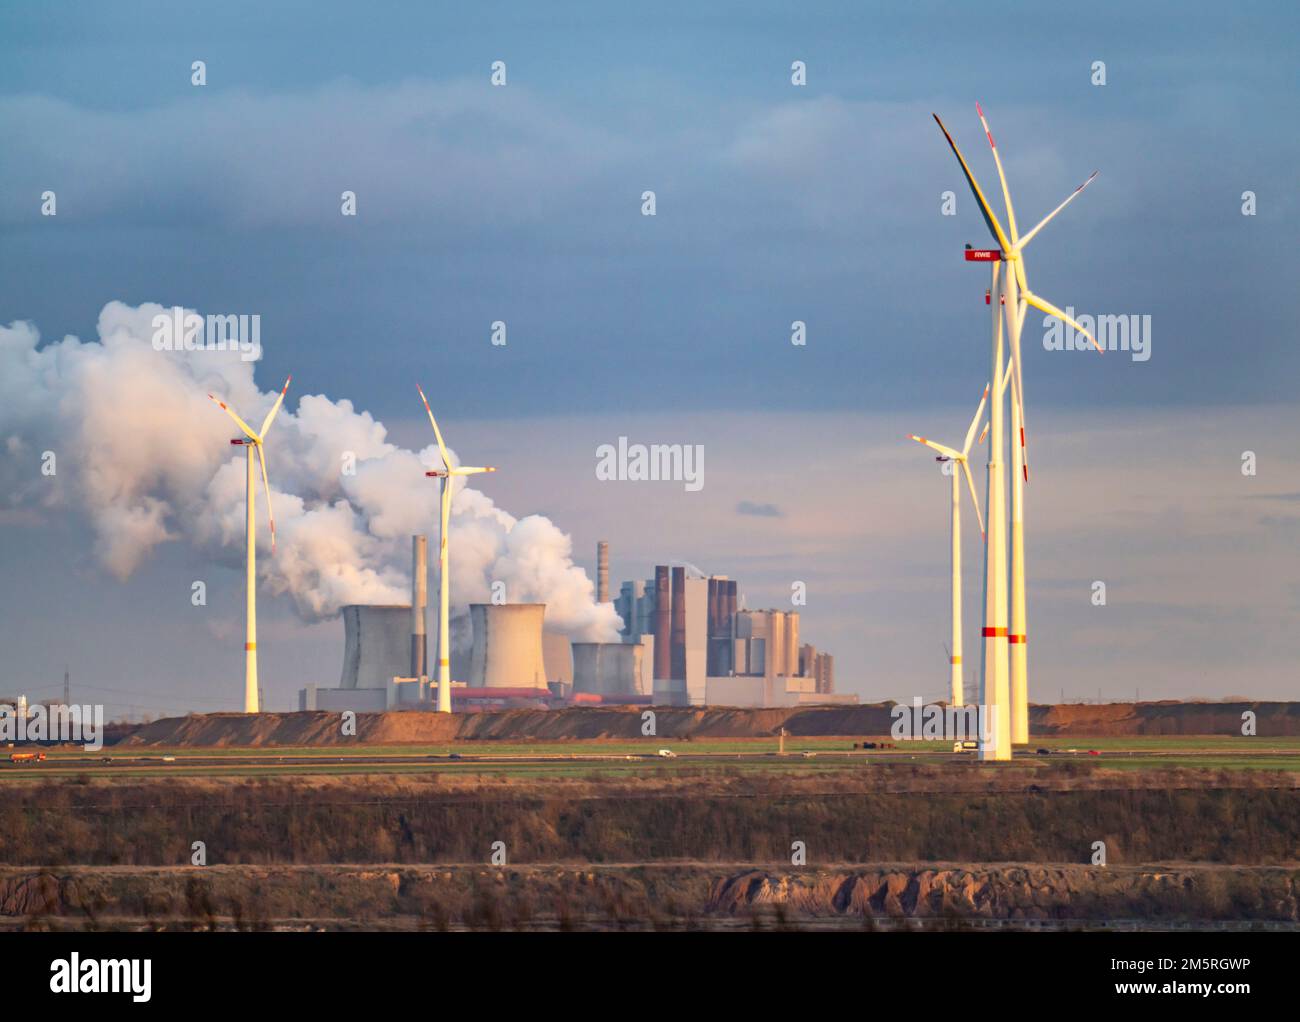 Lignite-fired power plant, RWE Power AG Seurat power plant, wind power plants, 2 units were shut down in 2020/21 and restarted in June 22 to replace g Stock Photo